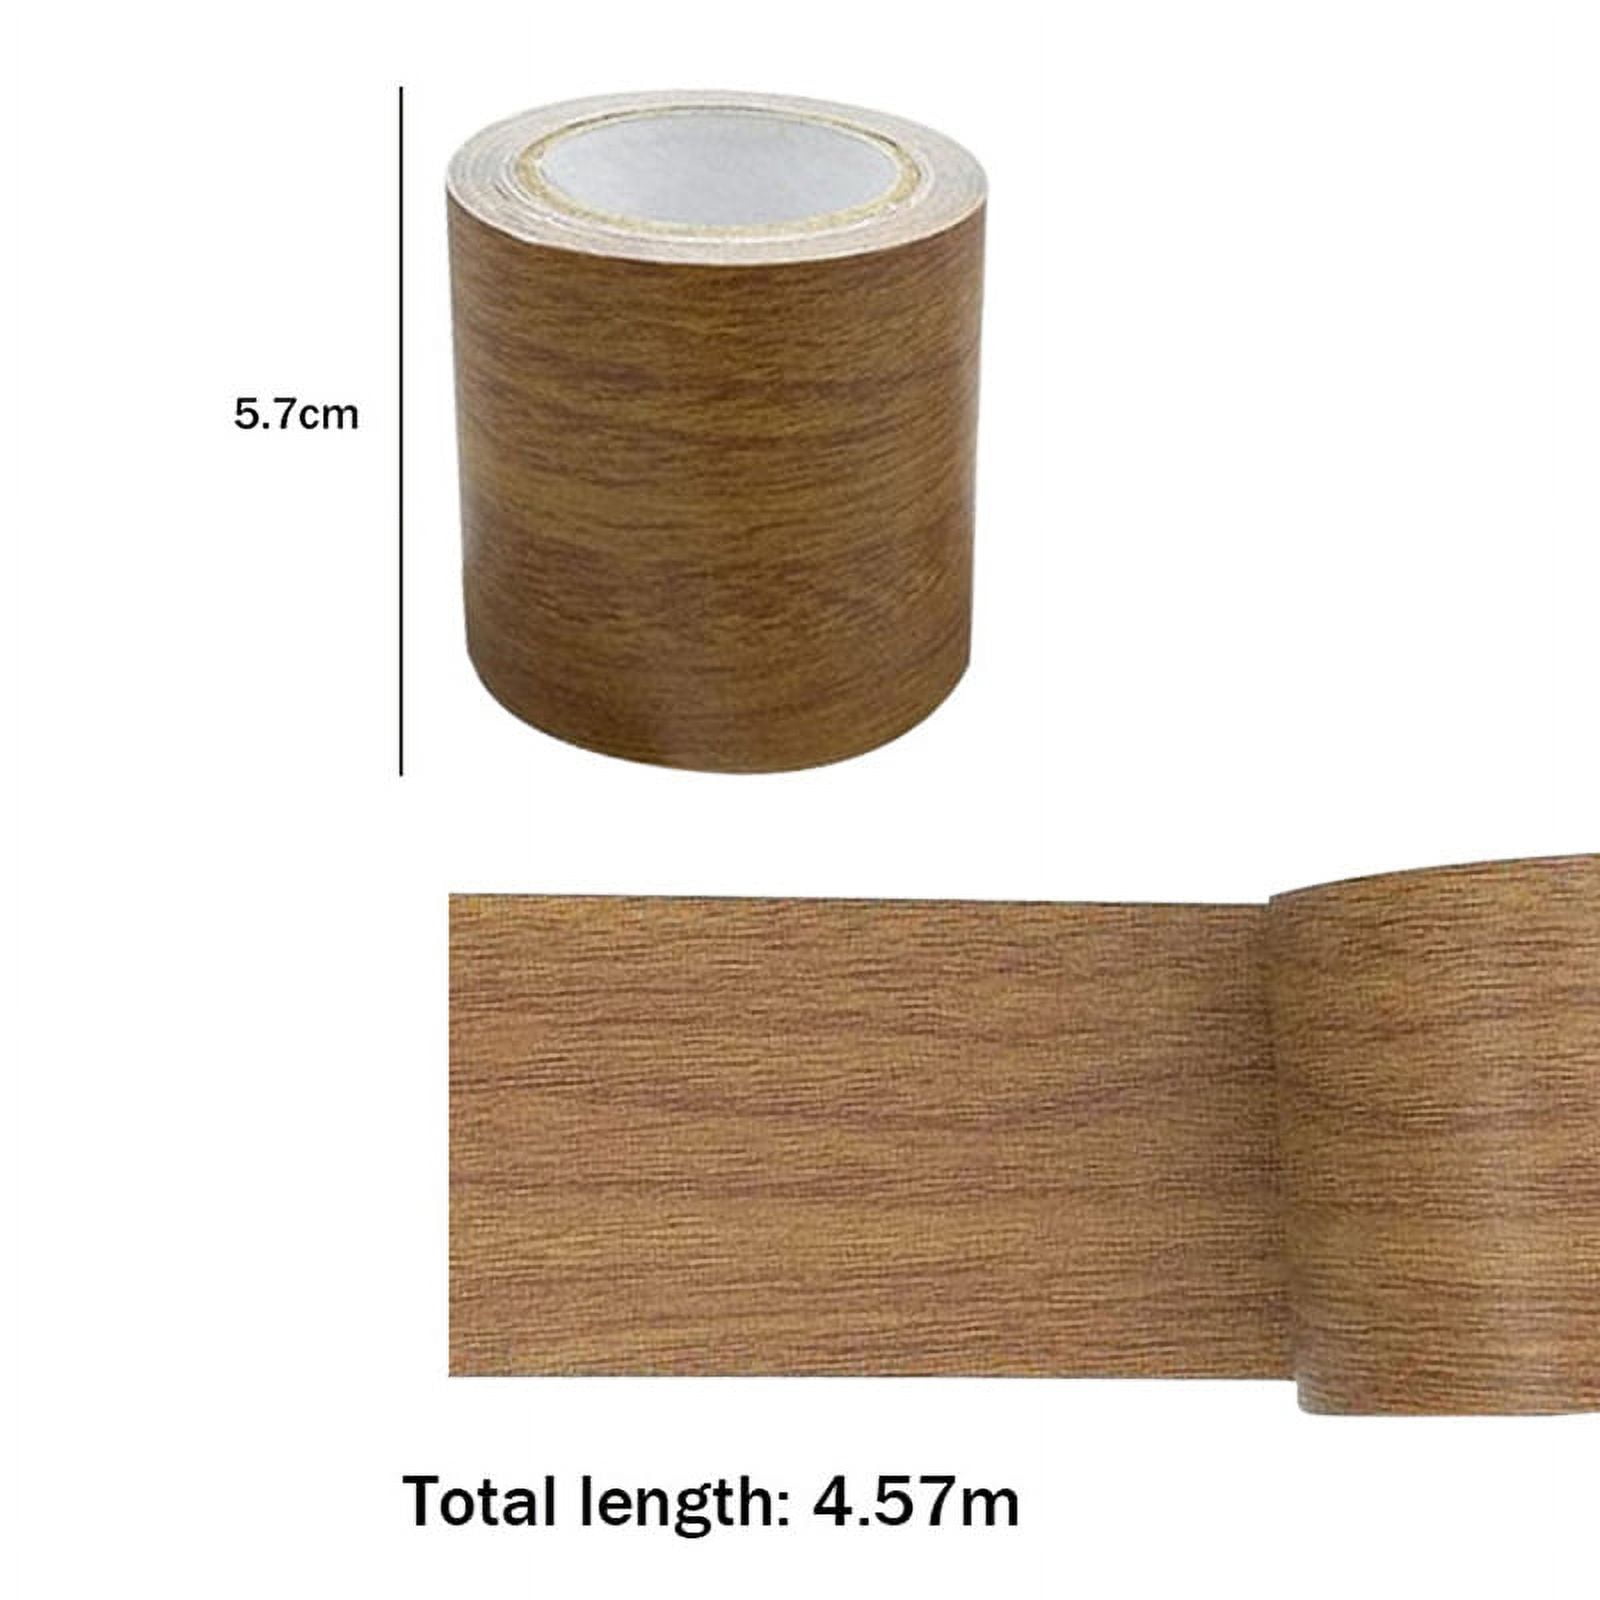 ULTECHNOVO 2 Pcs Wood Grain Tape Woodgrain Tape Wood Colored Duct Tape  Mirror Tape Red Light Stickers Wood Tape Repair Wood Washi Tape Wood Strips  Door Pe and OPP Tape Roll Tables